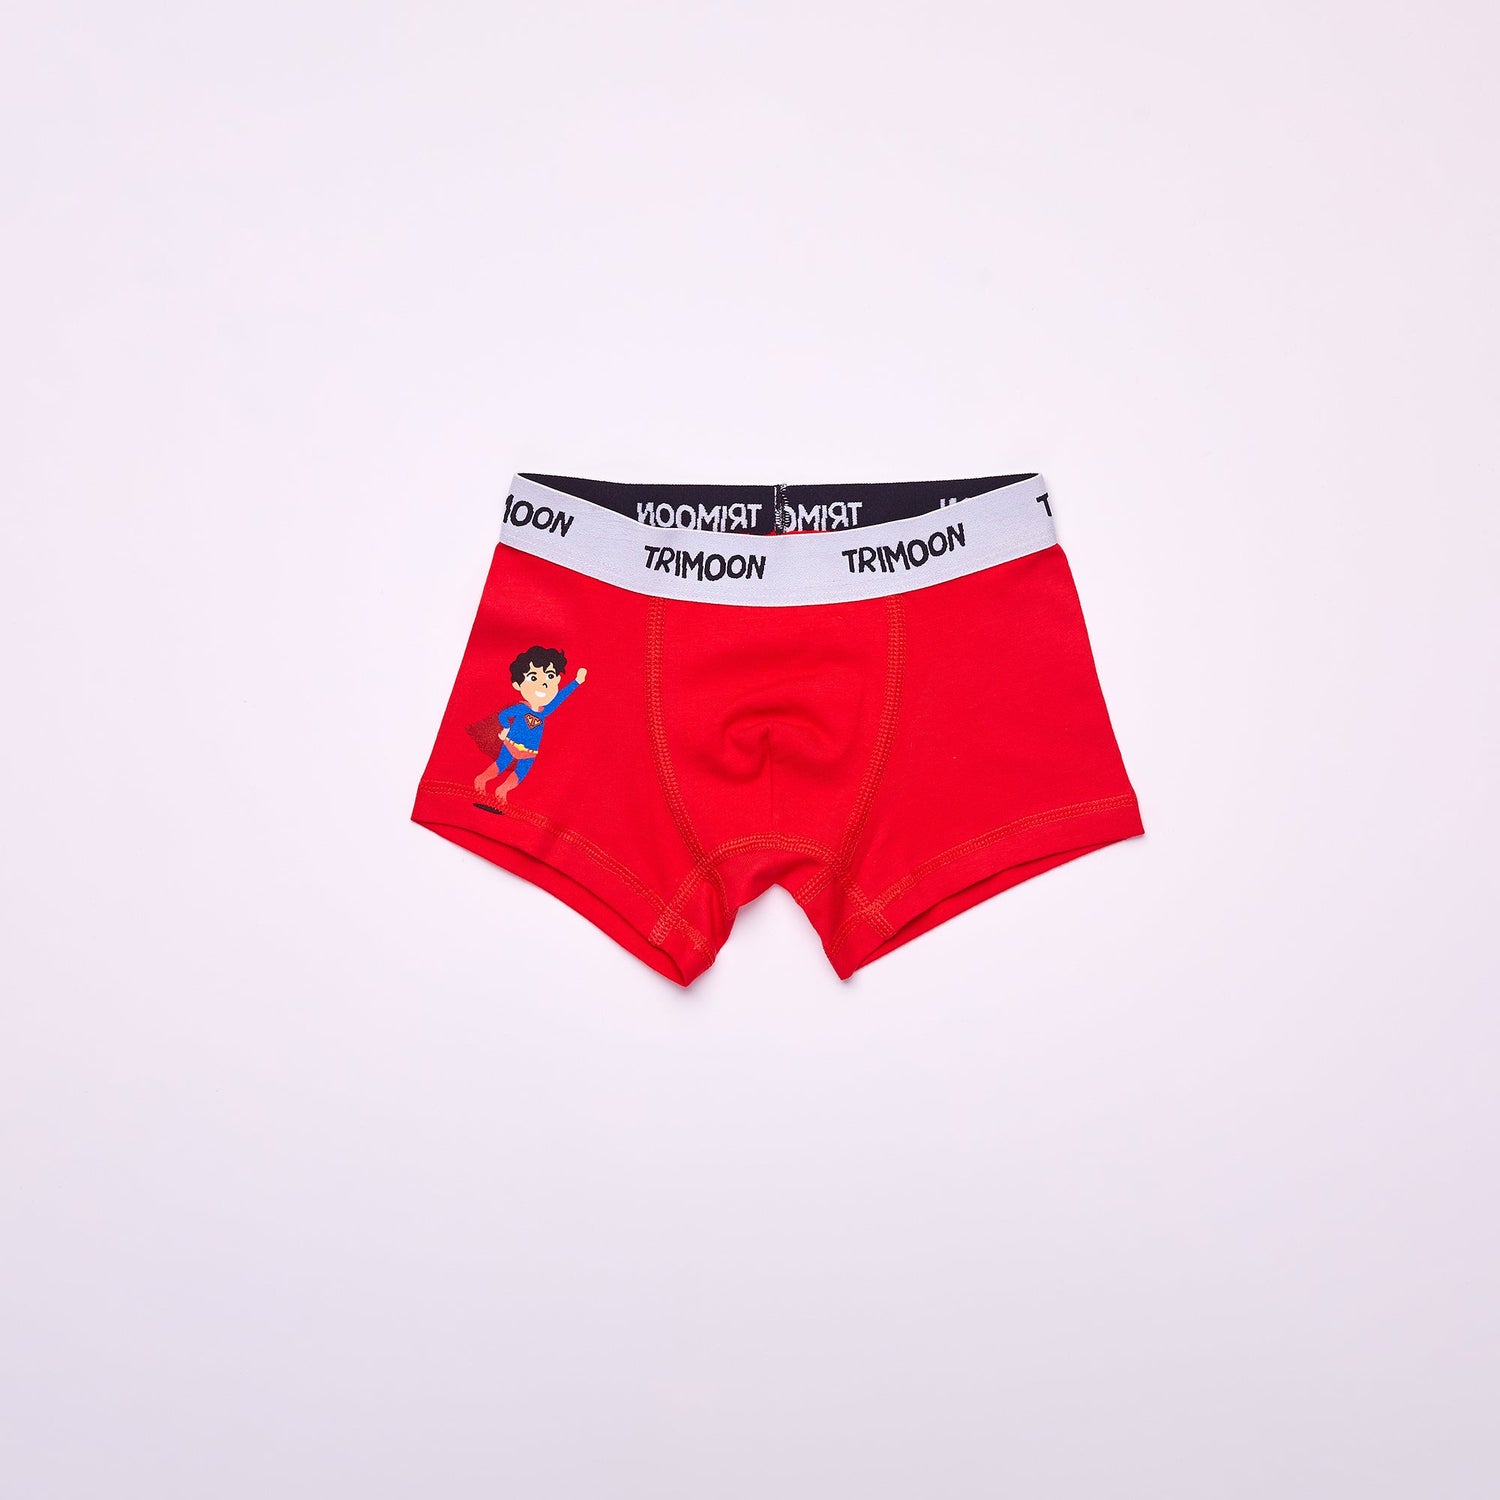 Trimoon Pack of 4 Brand New Boxers For Boys - Super T - mymadstore.com